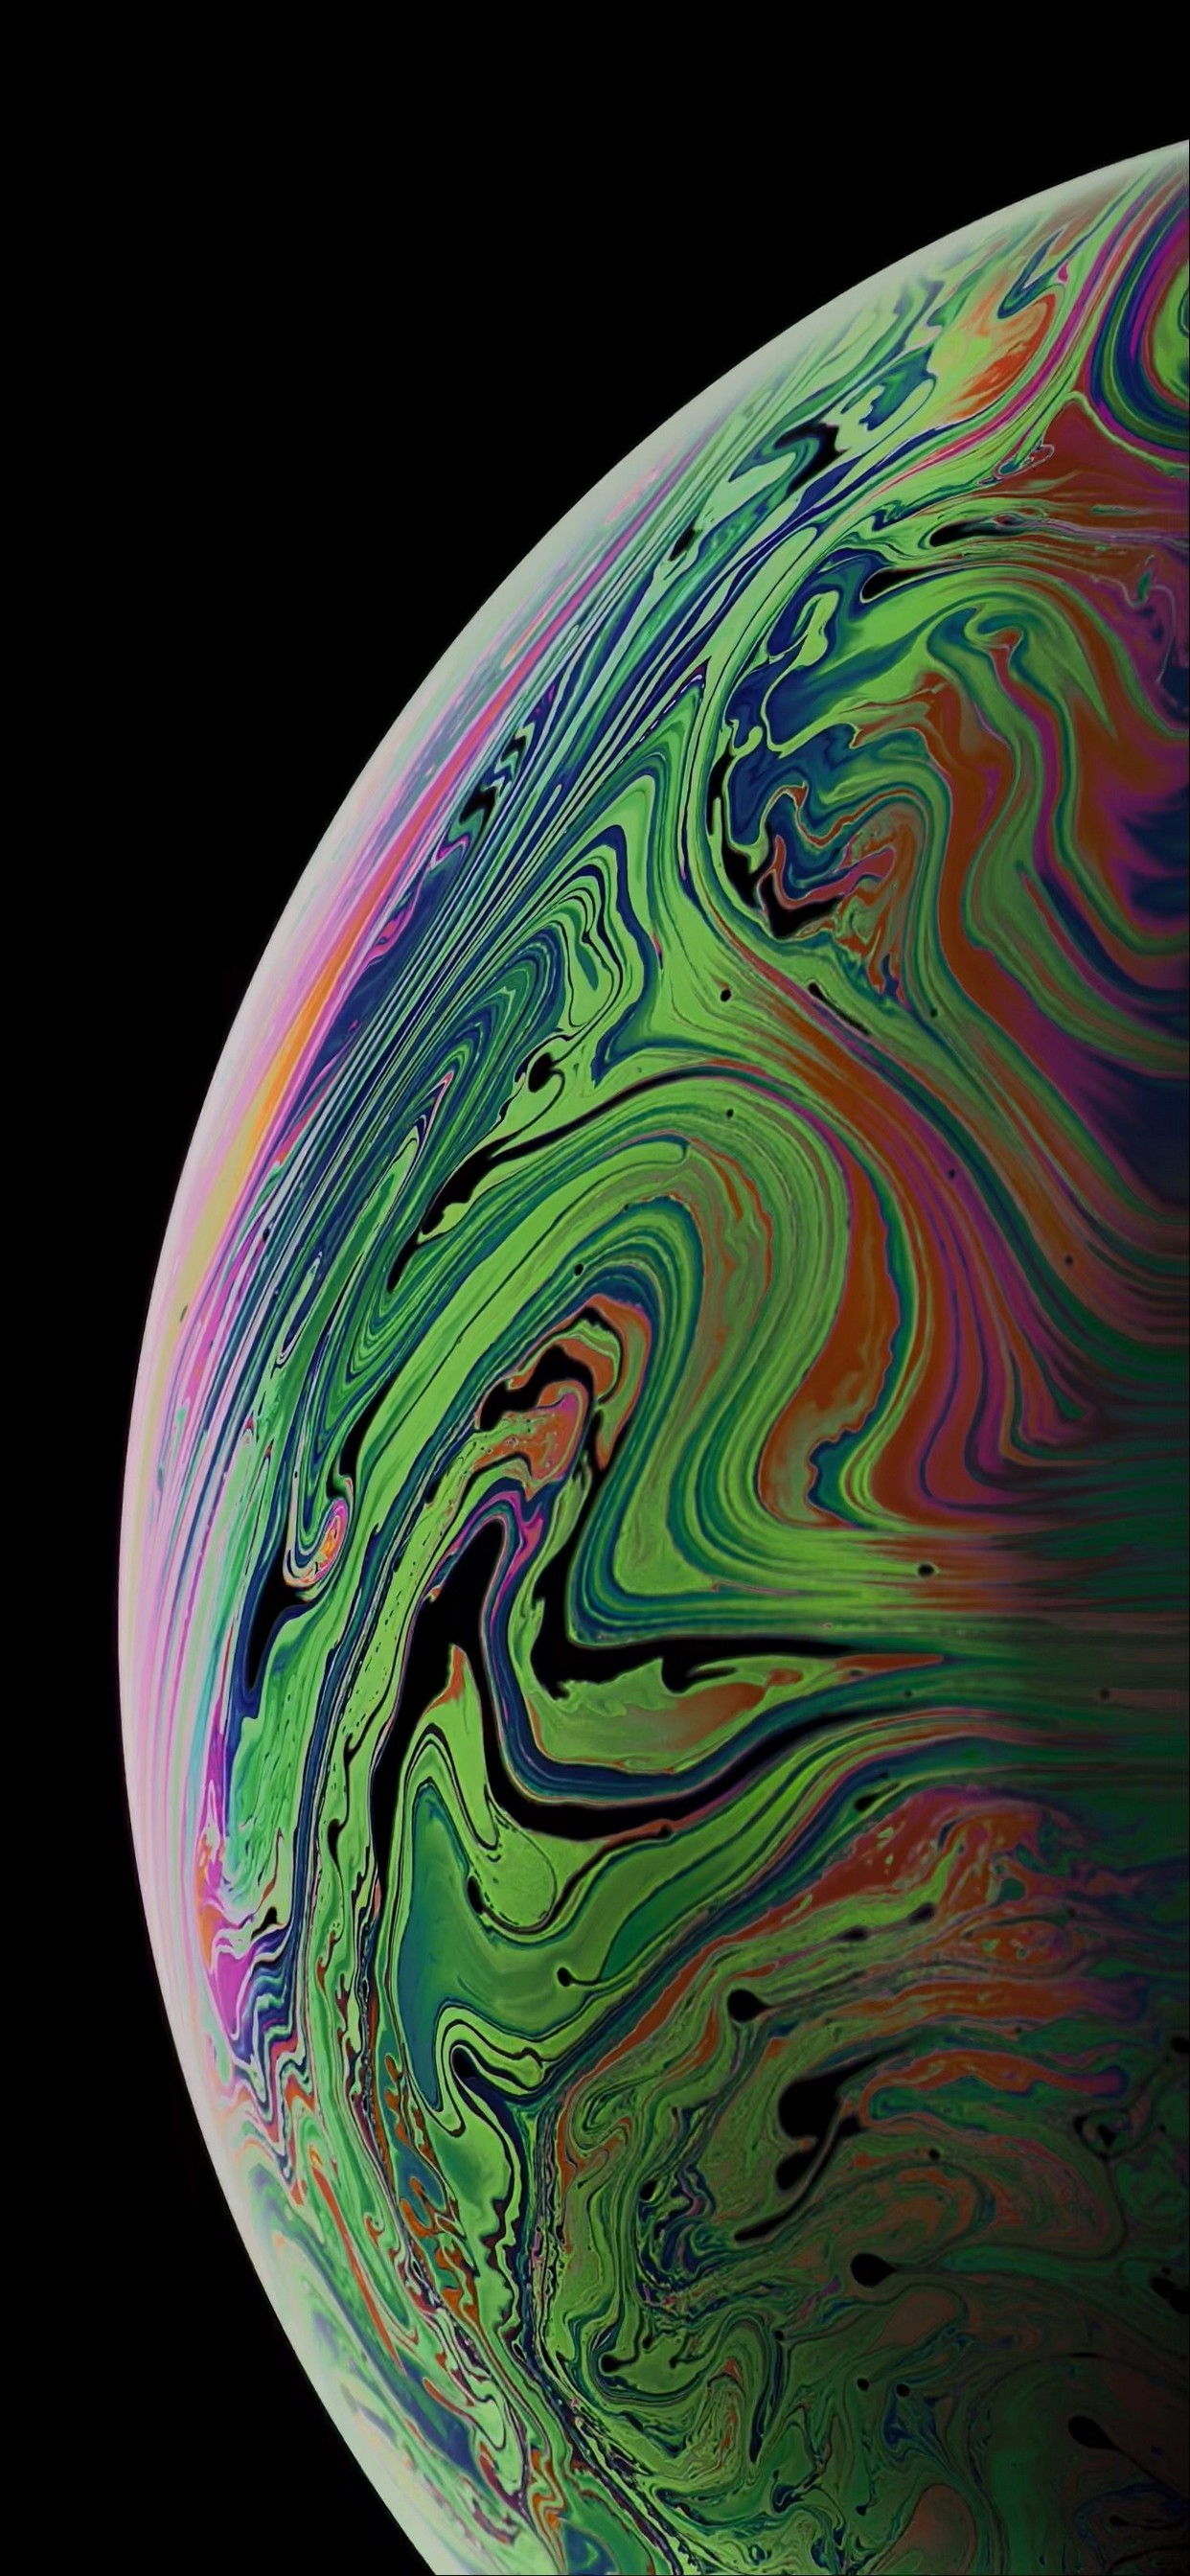 Iphone Xs Max Wallpaper New With High-resolution Pixel - 1242x2688